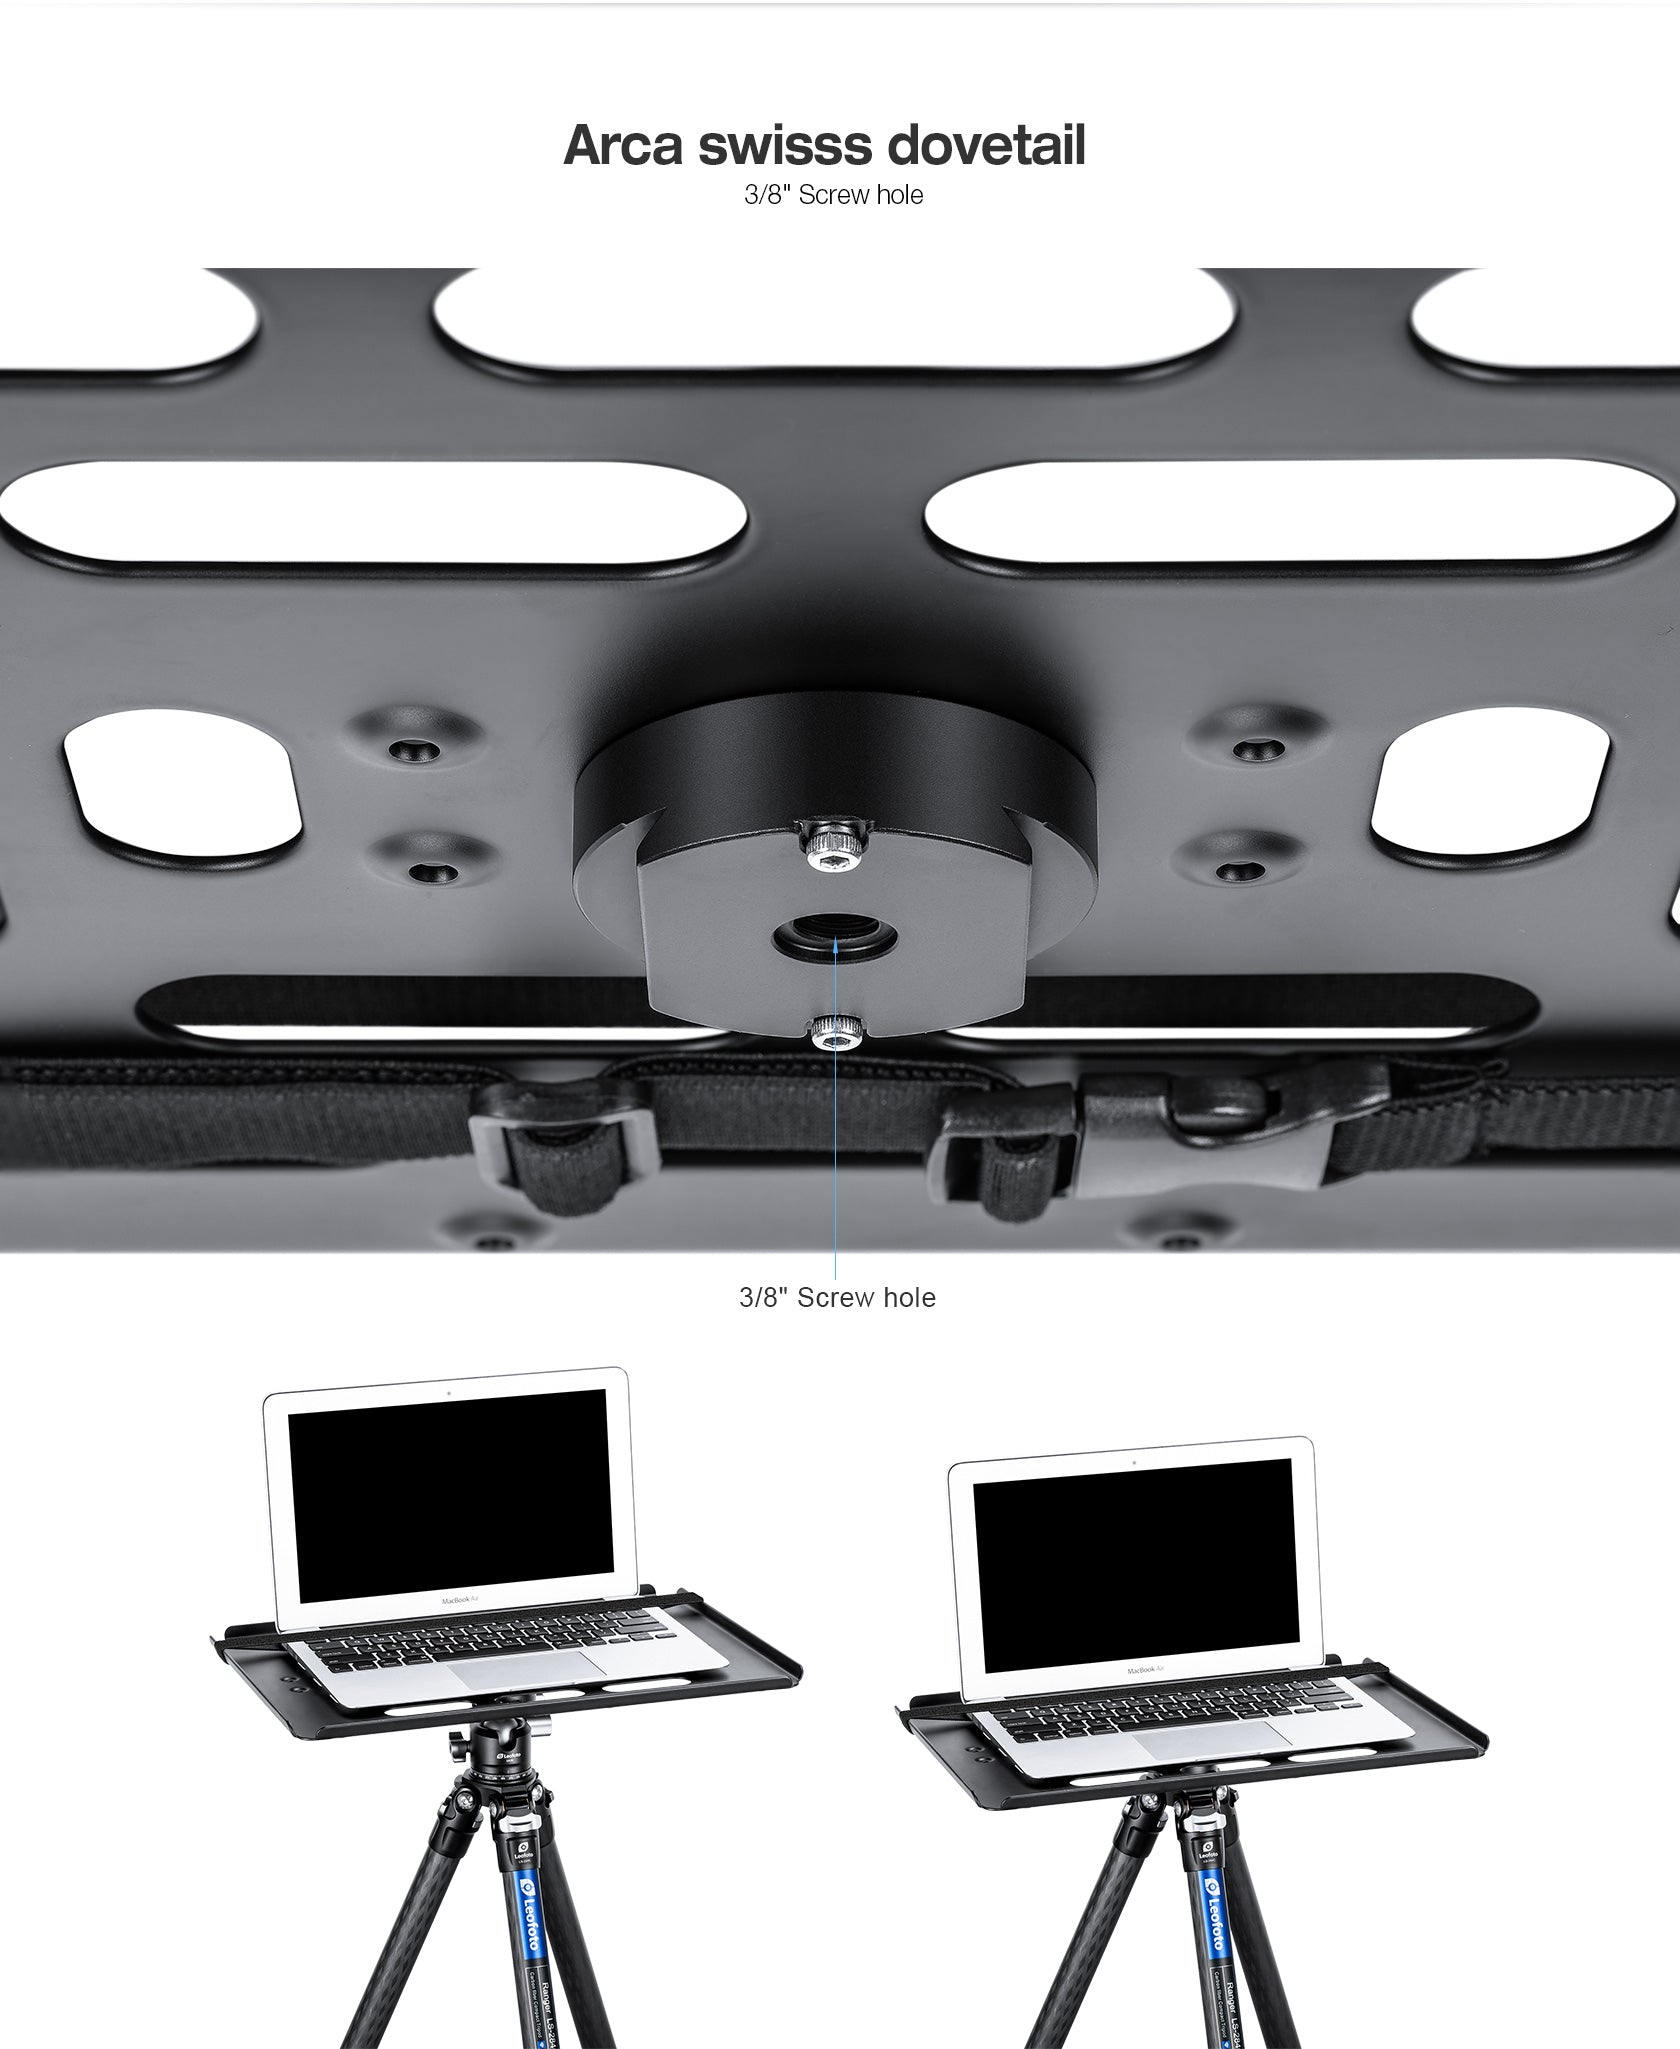 "Open Box" Leofoto LCH-2S 16" Laptop / Projector Tray / Combined with Tripod 3/8" Mounting Socket / Arca Swiss Dovetail